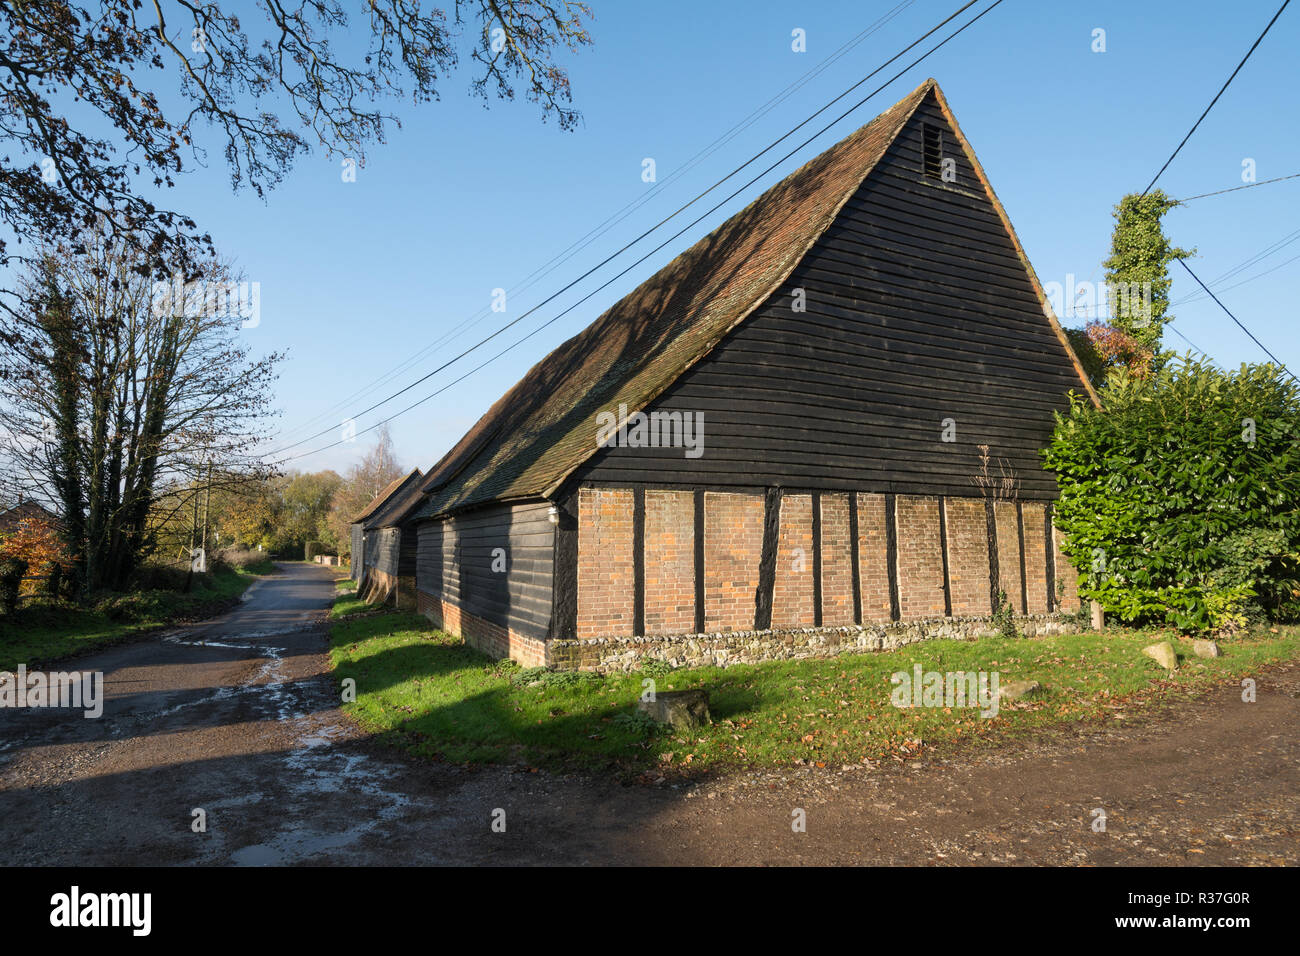 The Great Barn, built in 1388, in the small rural village of Wanborough, Surrey, UK. Historic building, agricultural heritage. Stock Photo